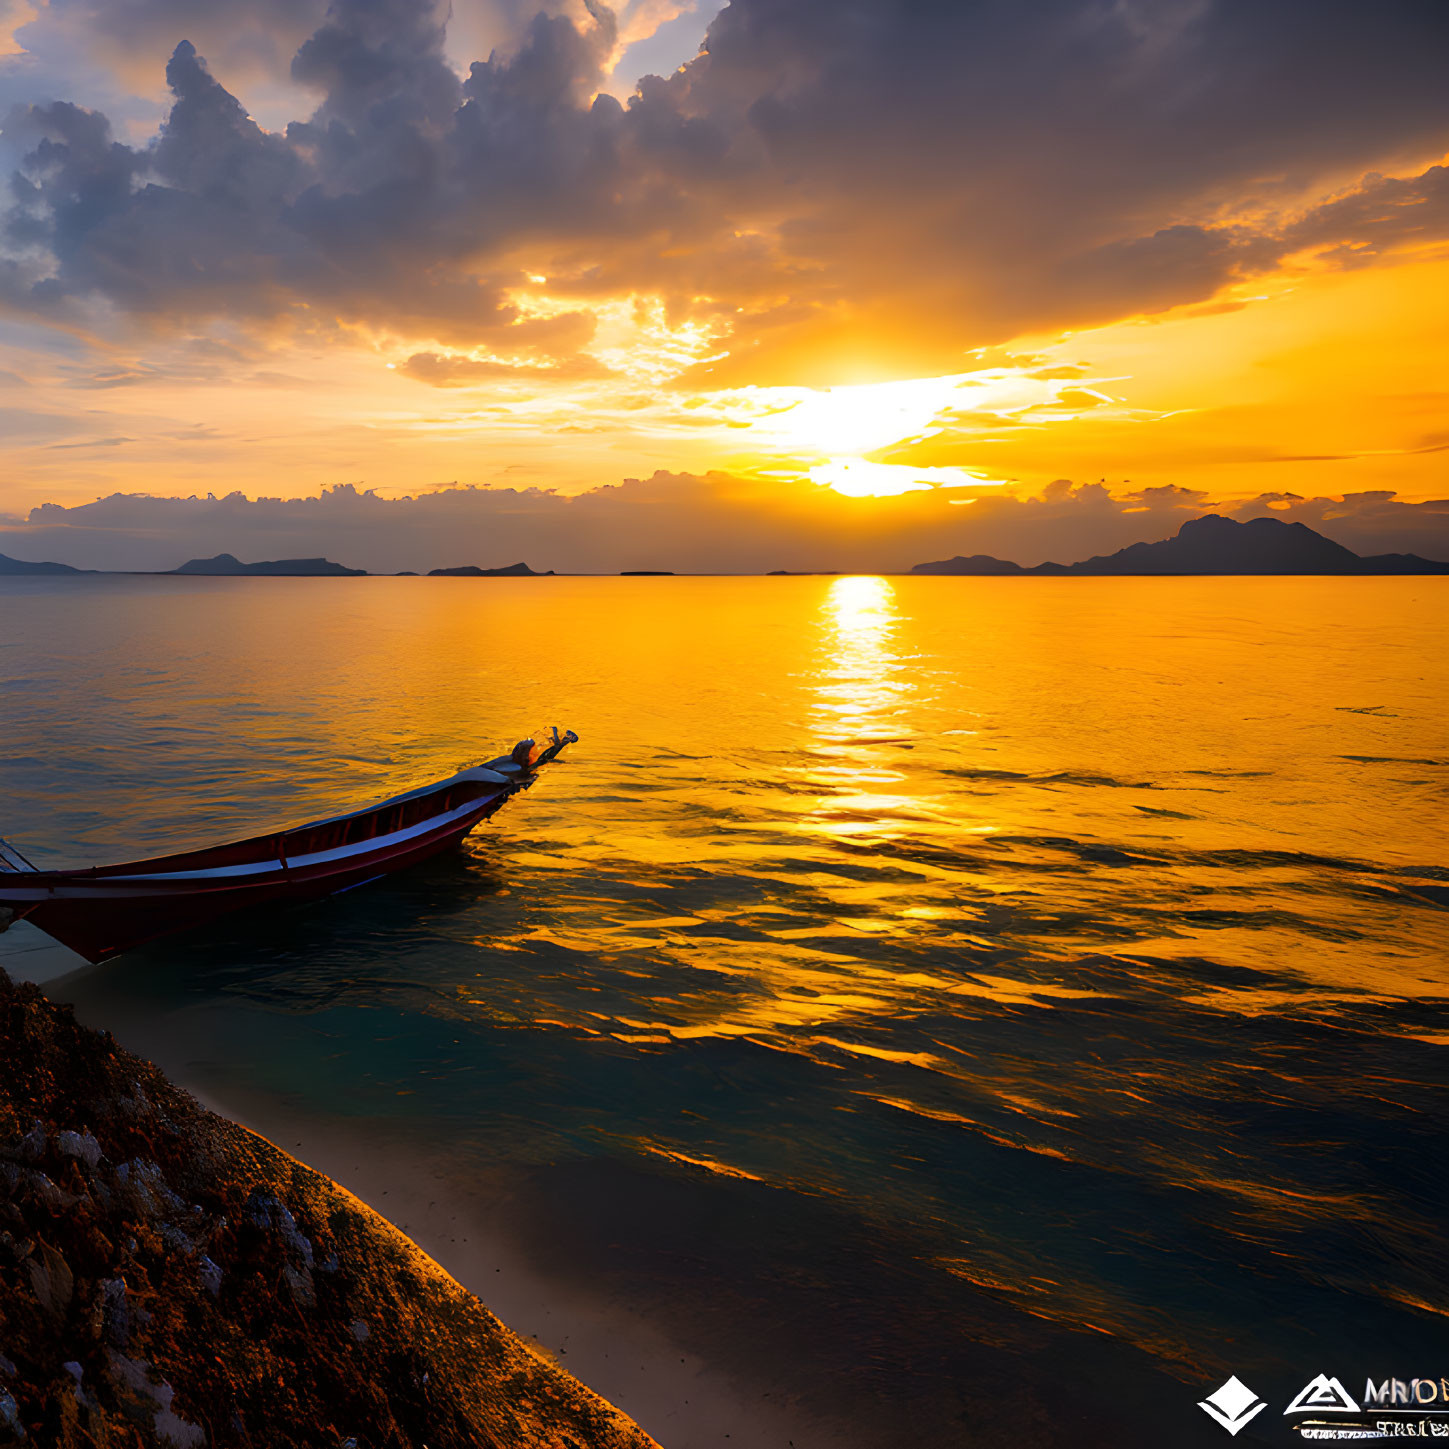 Boat floating on calm waters at sunset